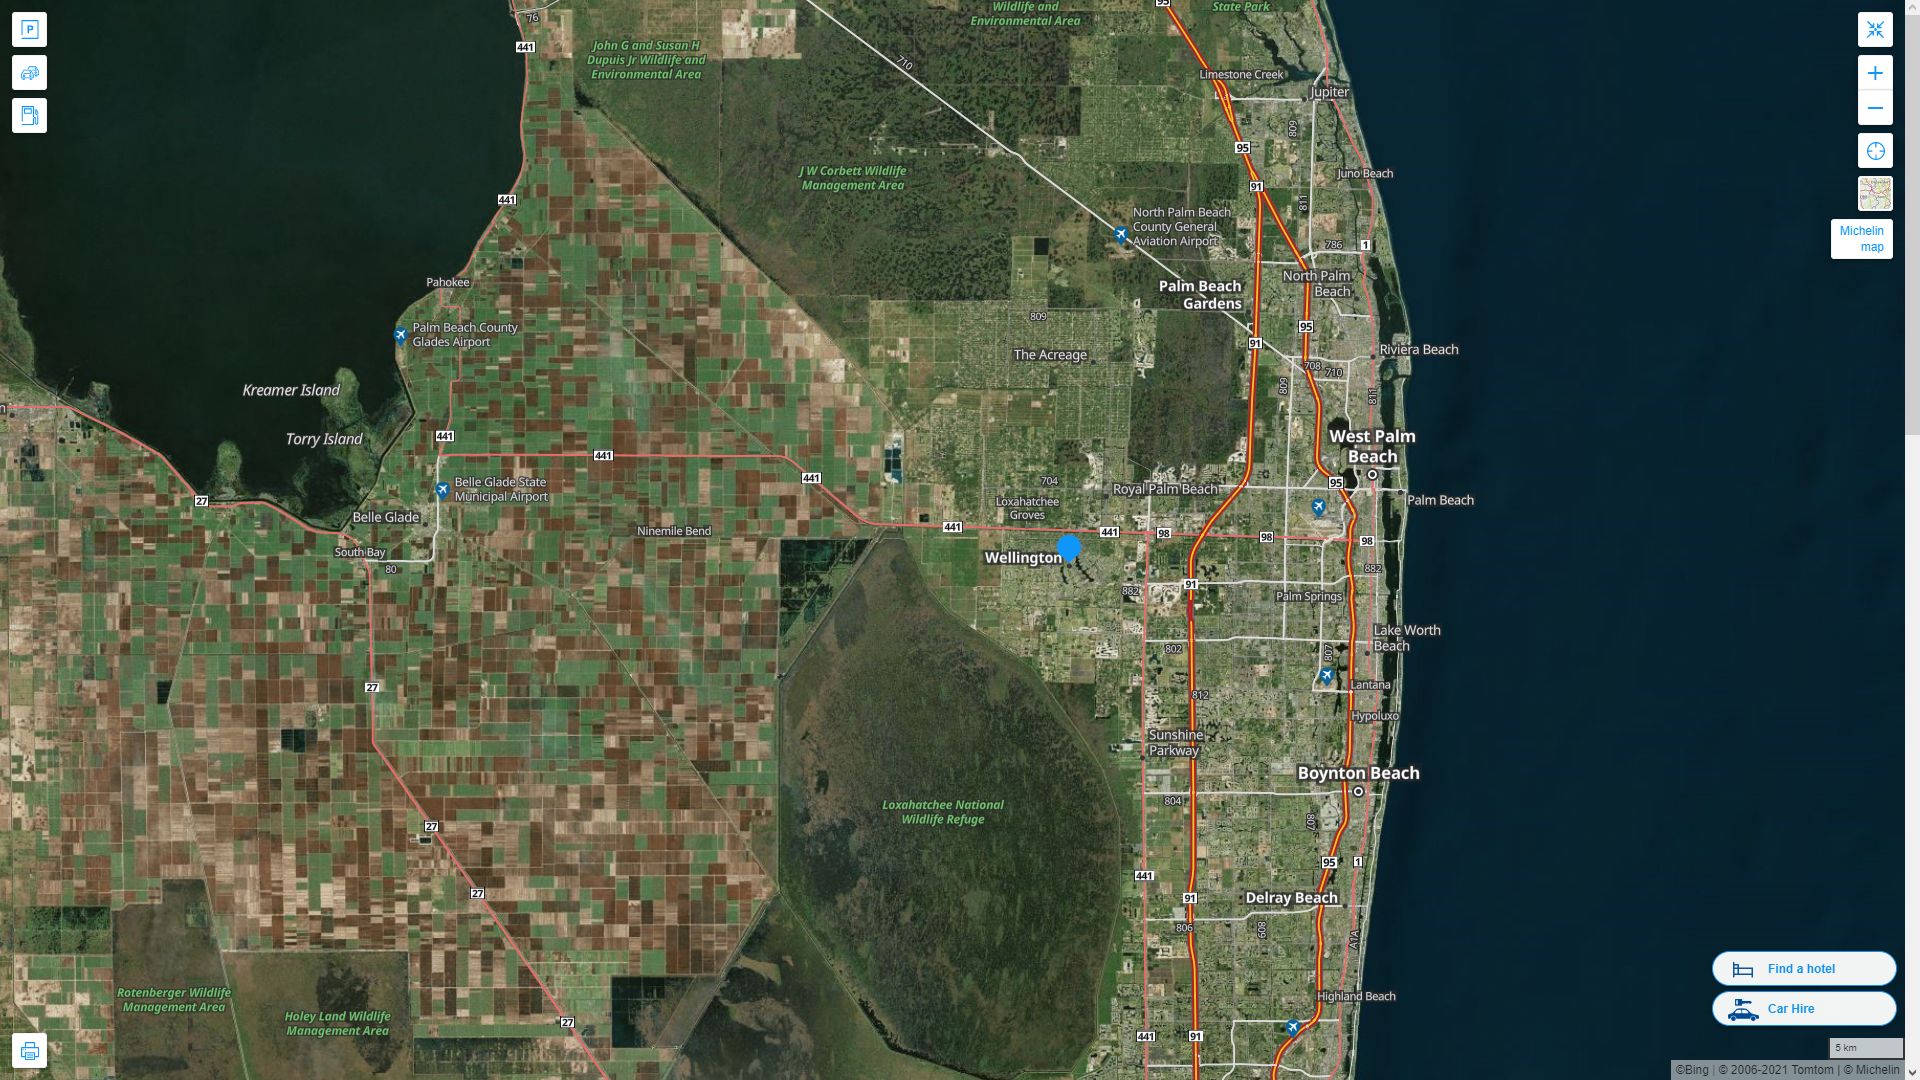 Wellington Florida Highway and Road Map with Satellite View